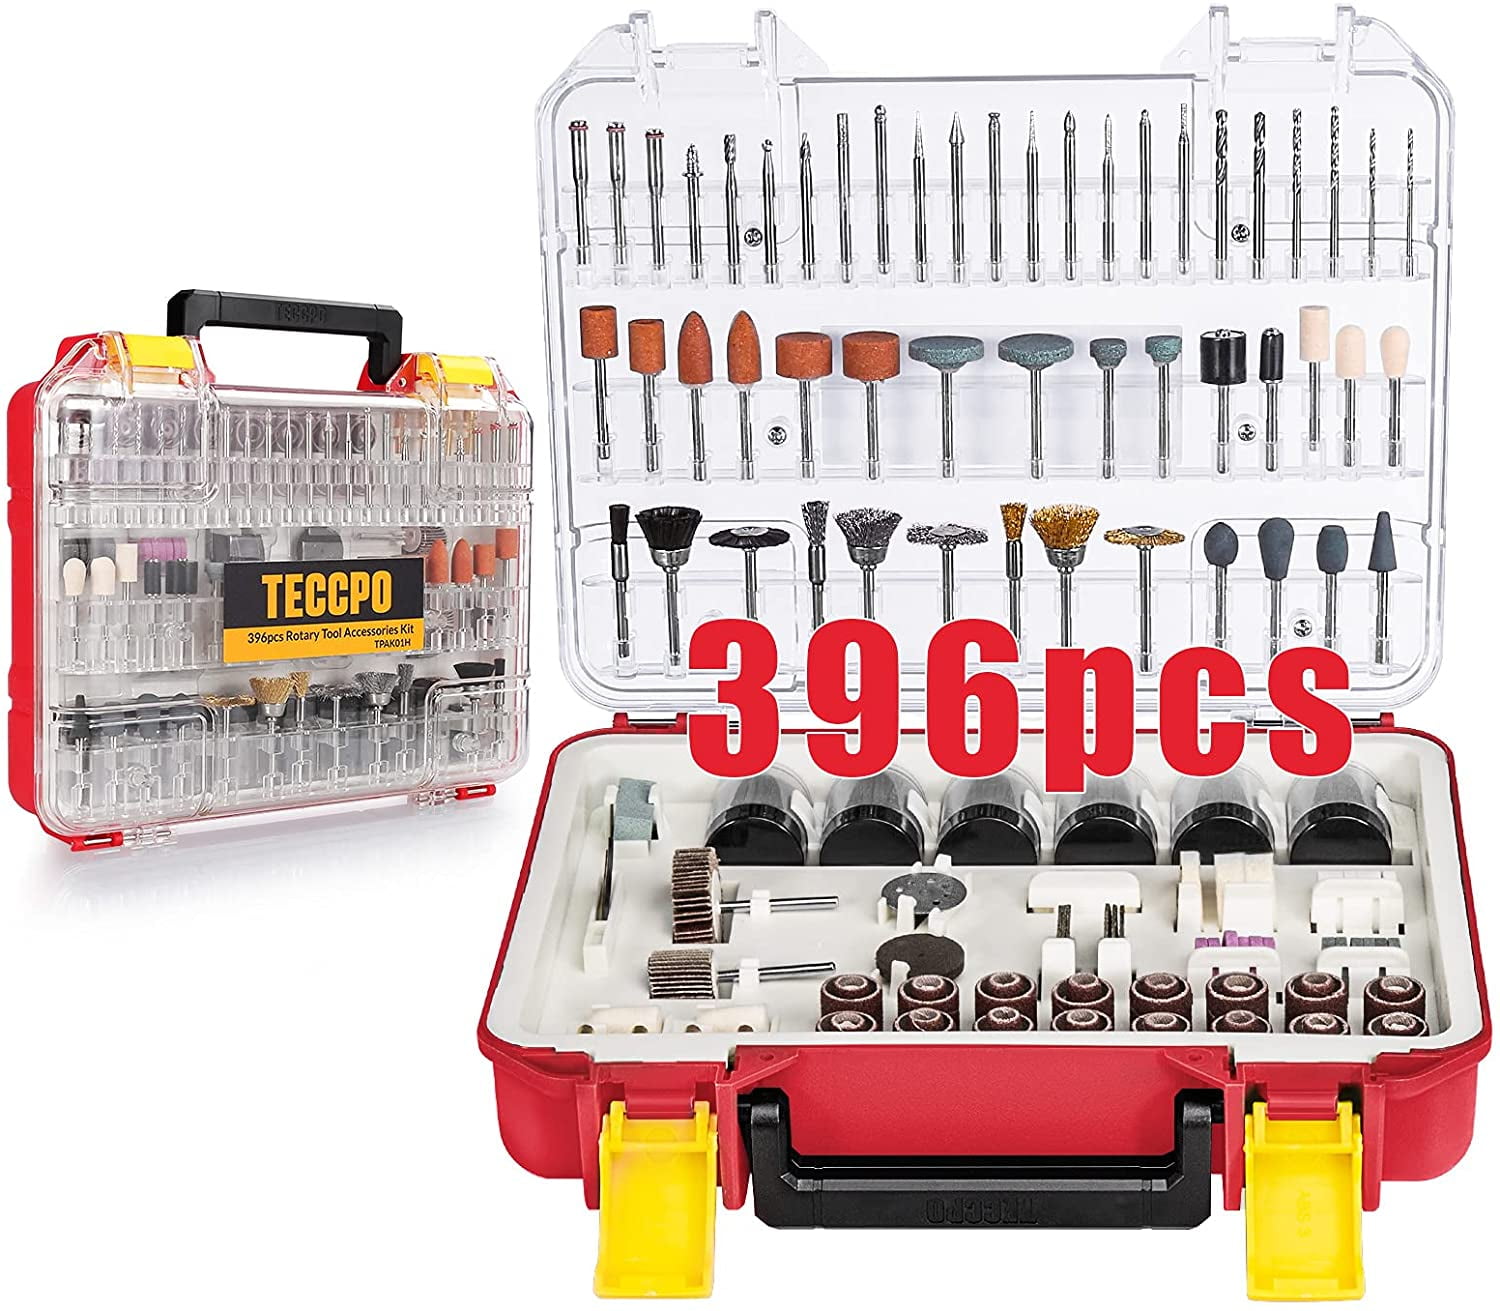 Rotary Tools With 114pcs Standard Accessories